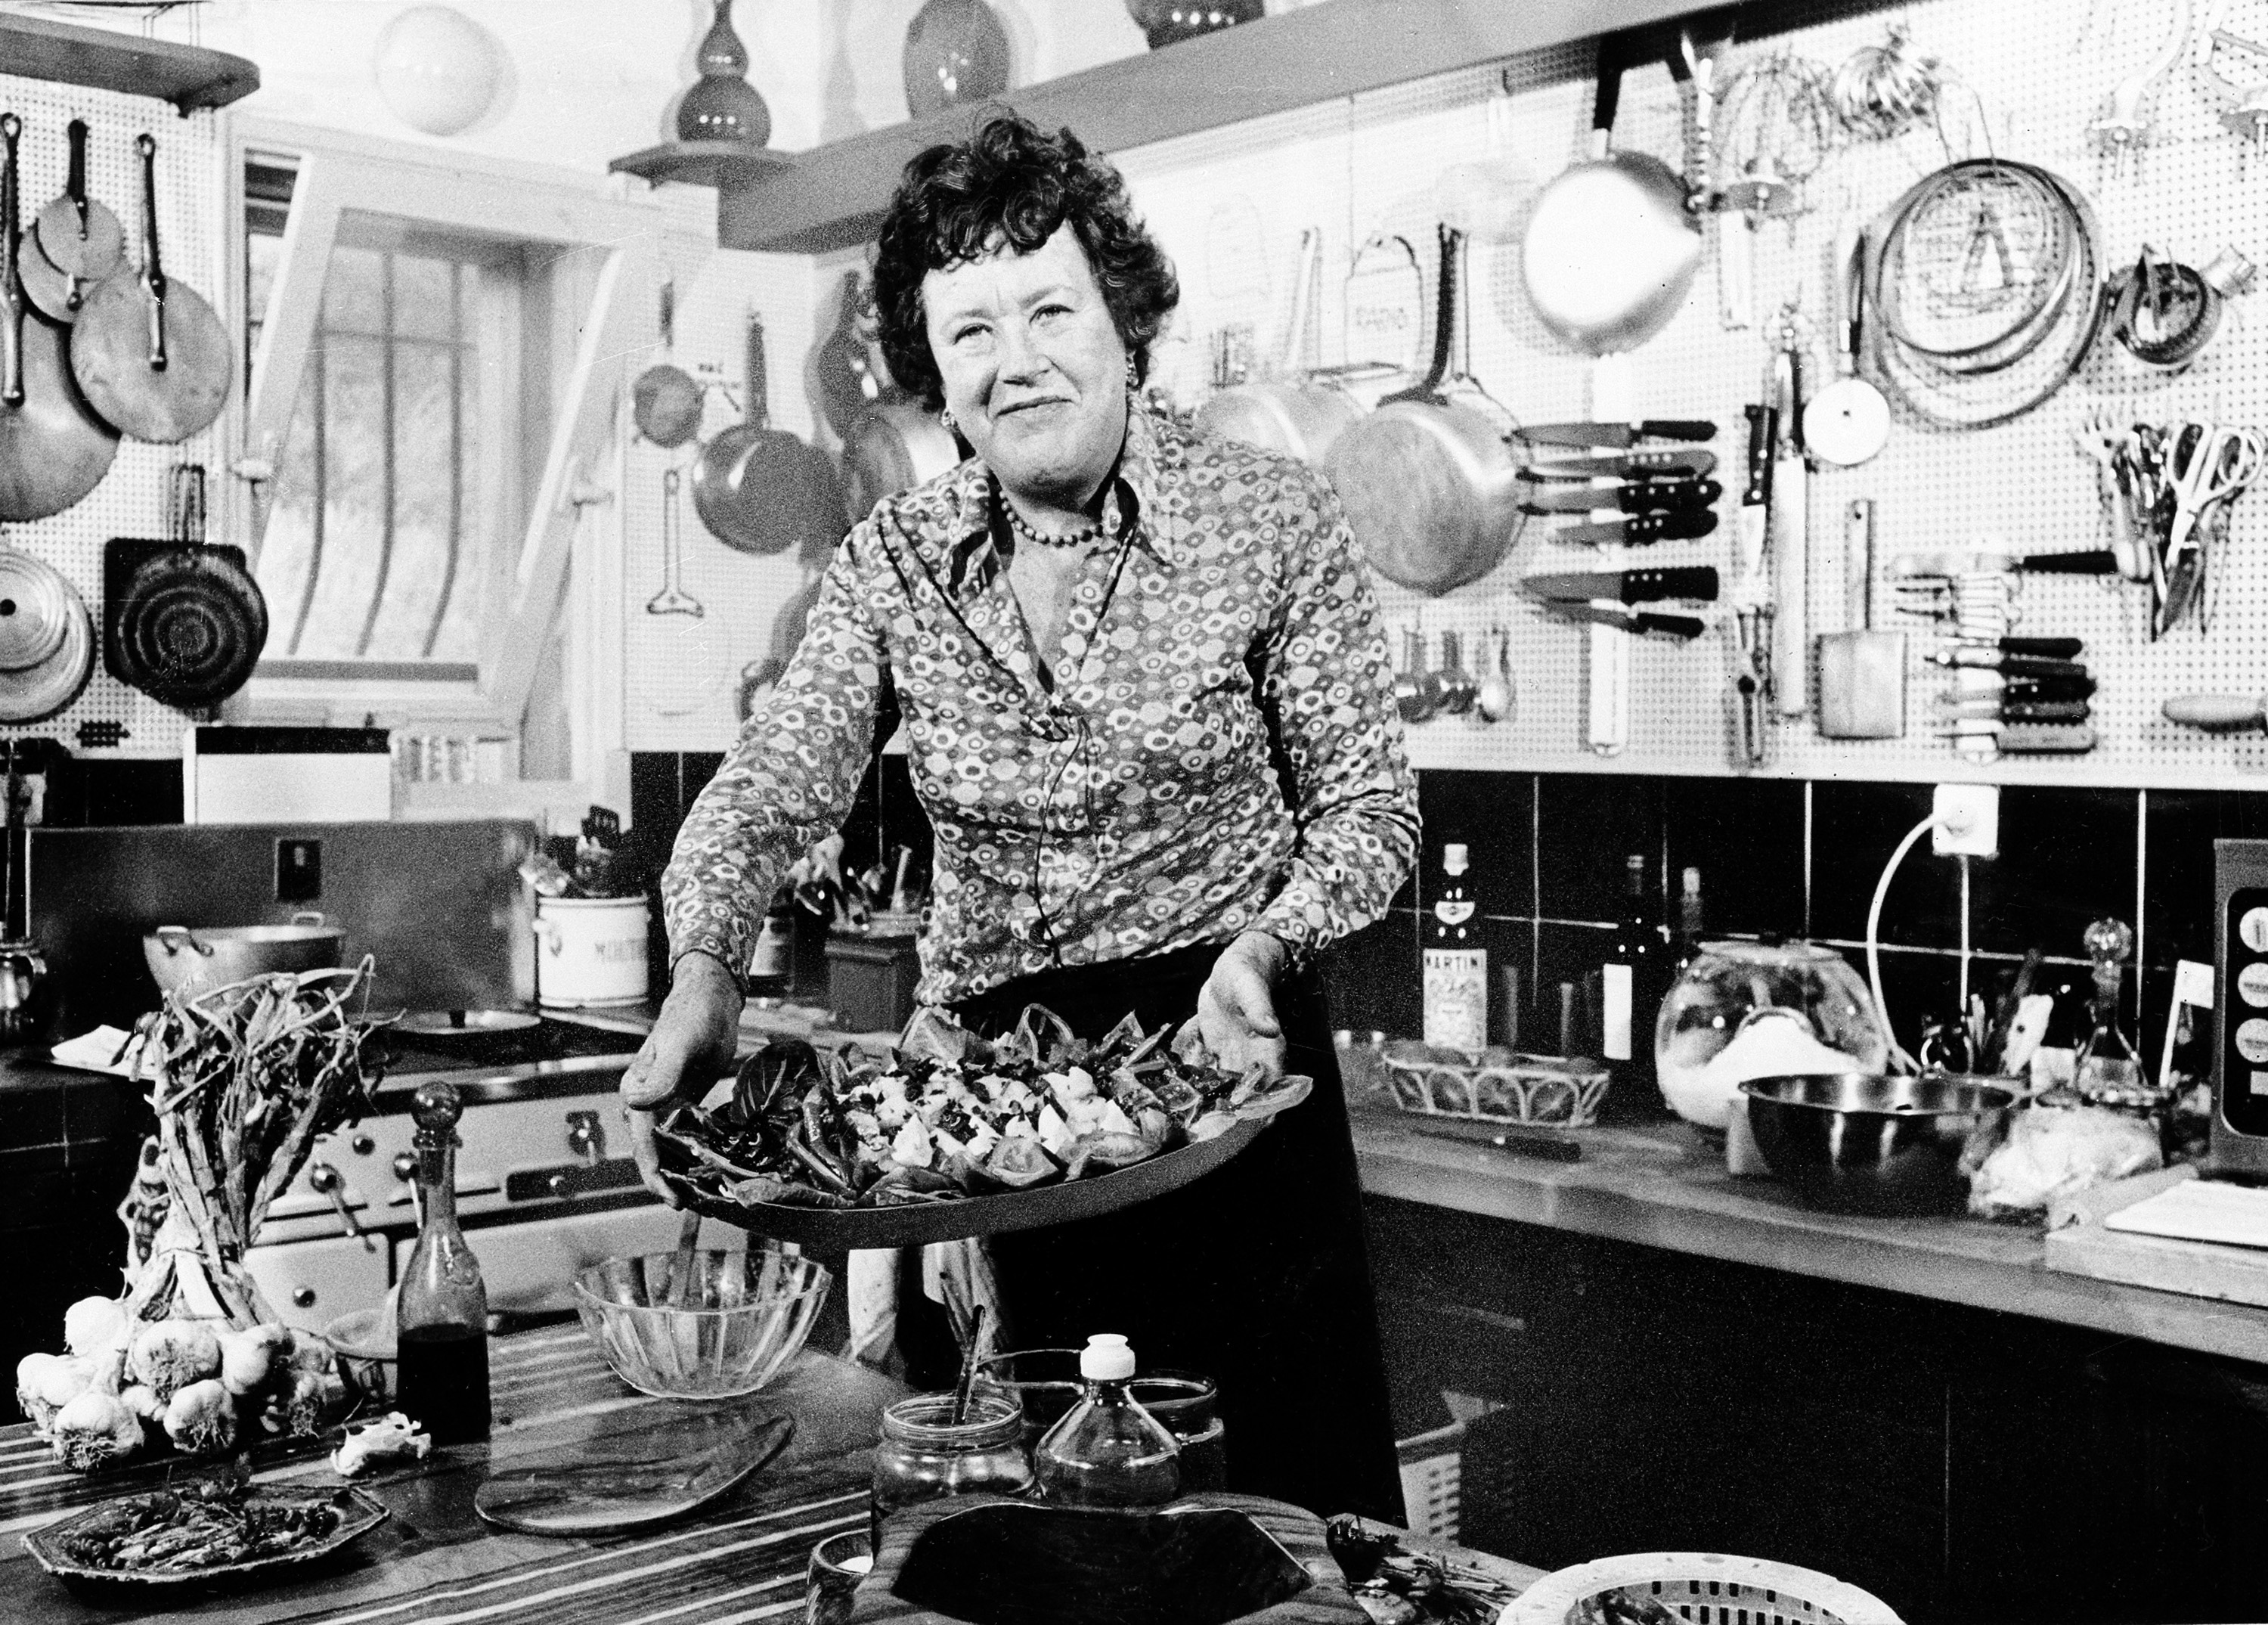 FILE - In this Aug. 21, 1978, file photo, American television chef Julia Child shows a salade nicoise she prepared in the kitchen of her vacation home in Grasse, southern France. Child changed the way Americans look at food as well as the way women looked at cooking and themselves. (AP Photo, File) 08092012xBRIEFING